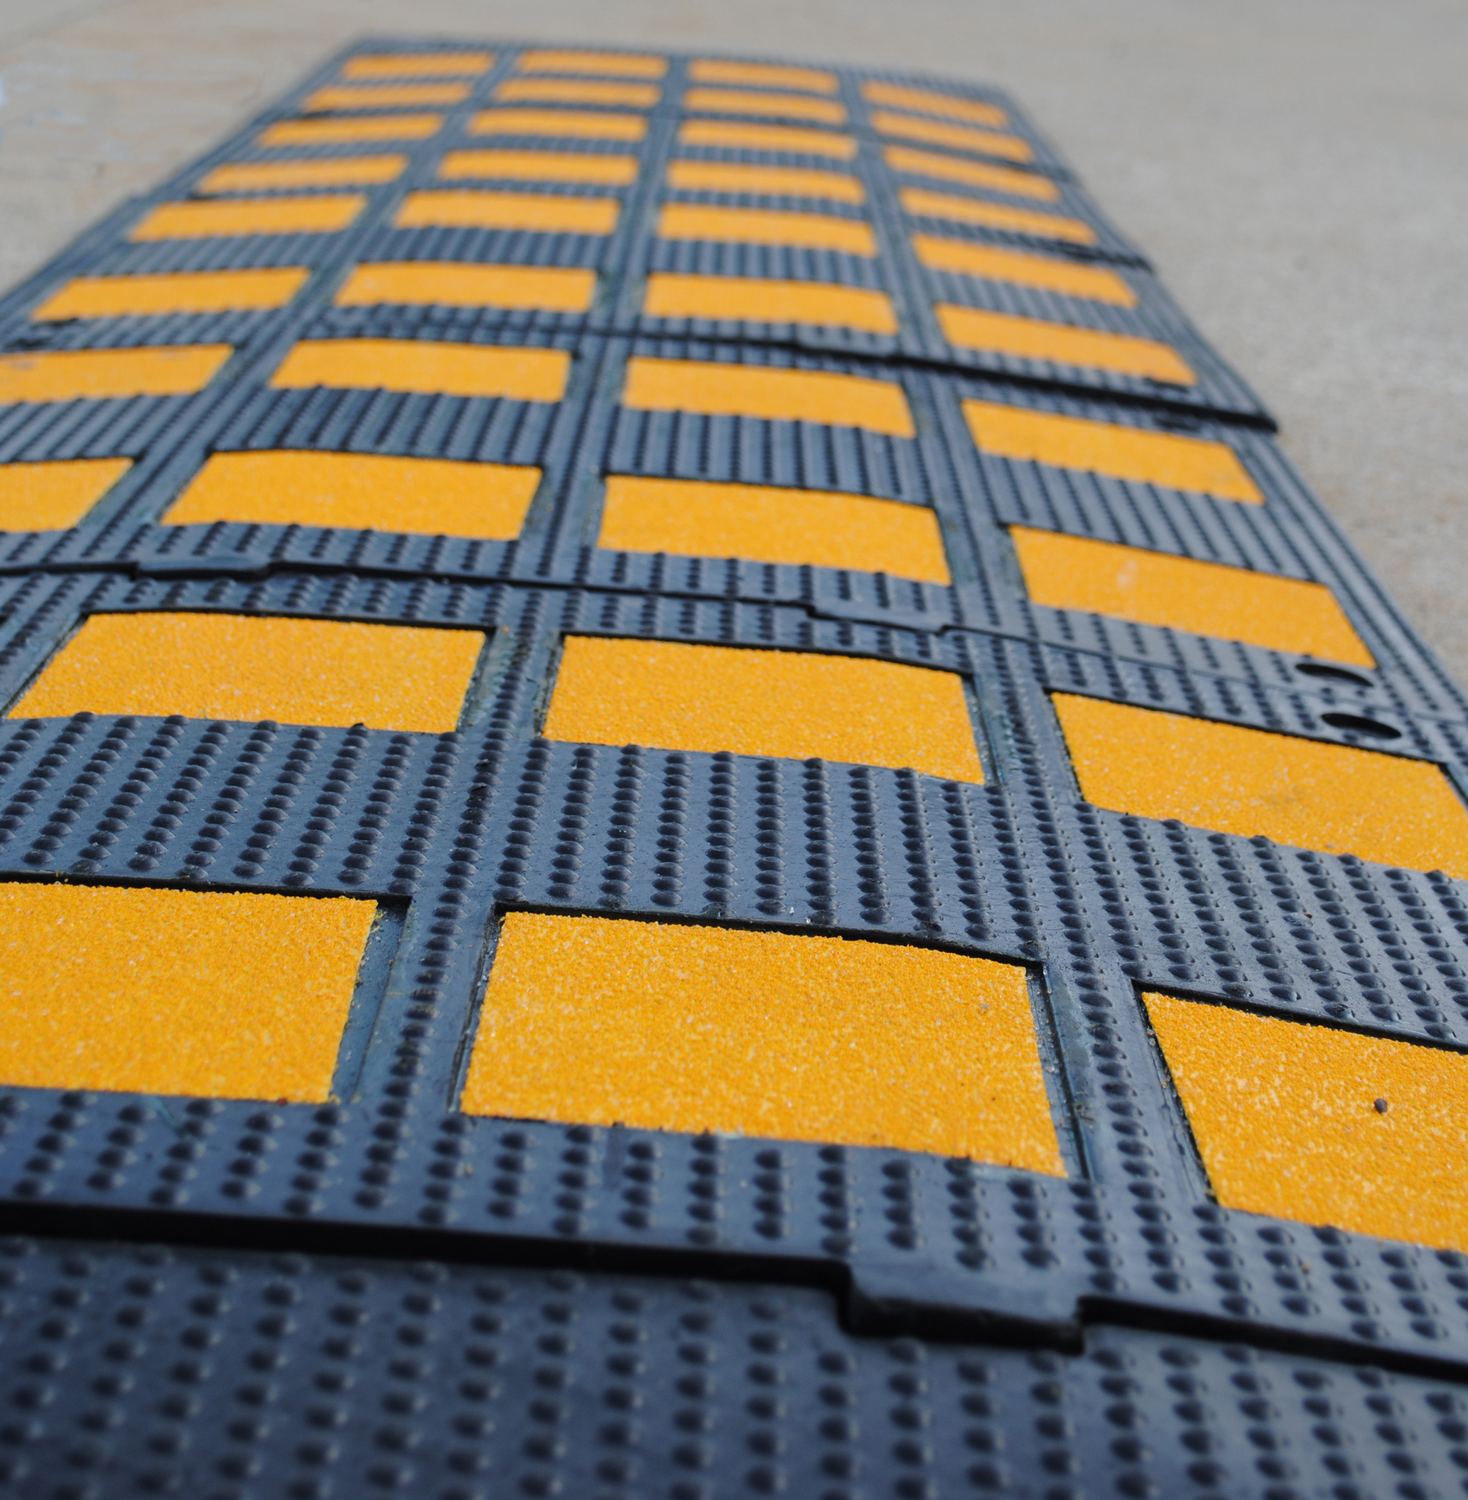 RS PRO Rubber Speed Bump End Cap, 600mm x 300 mm x 20 mm, 30km/h Speed Limit